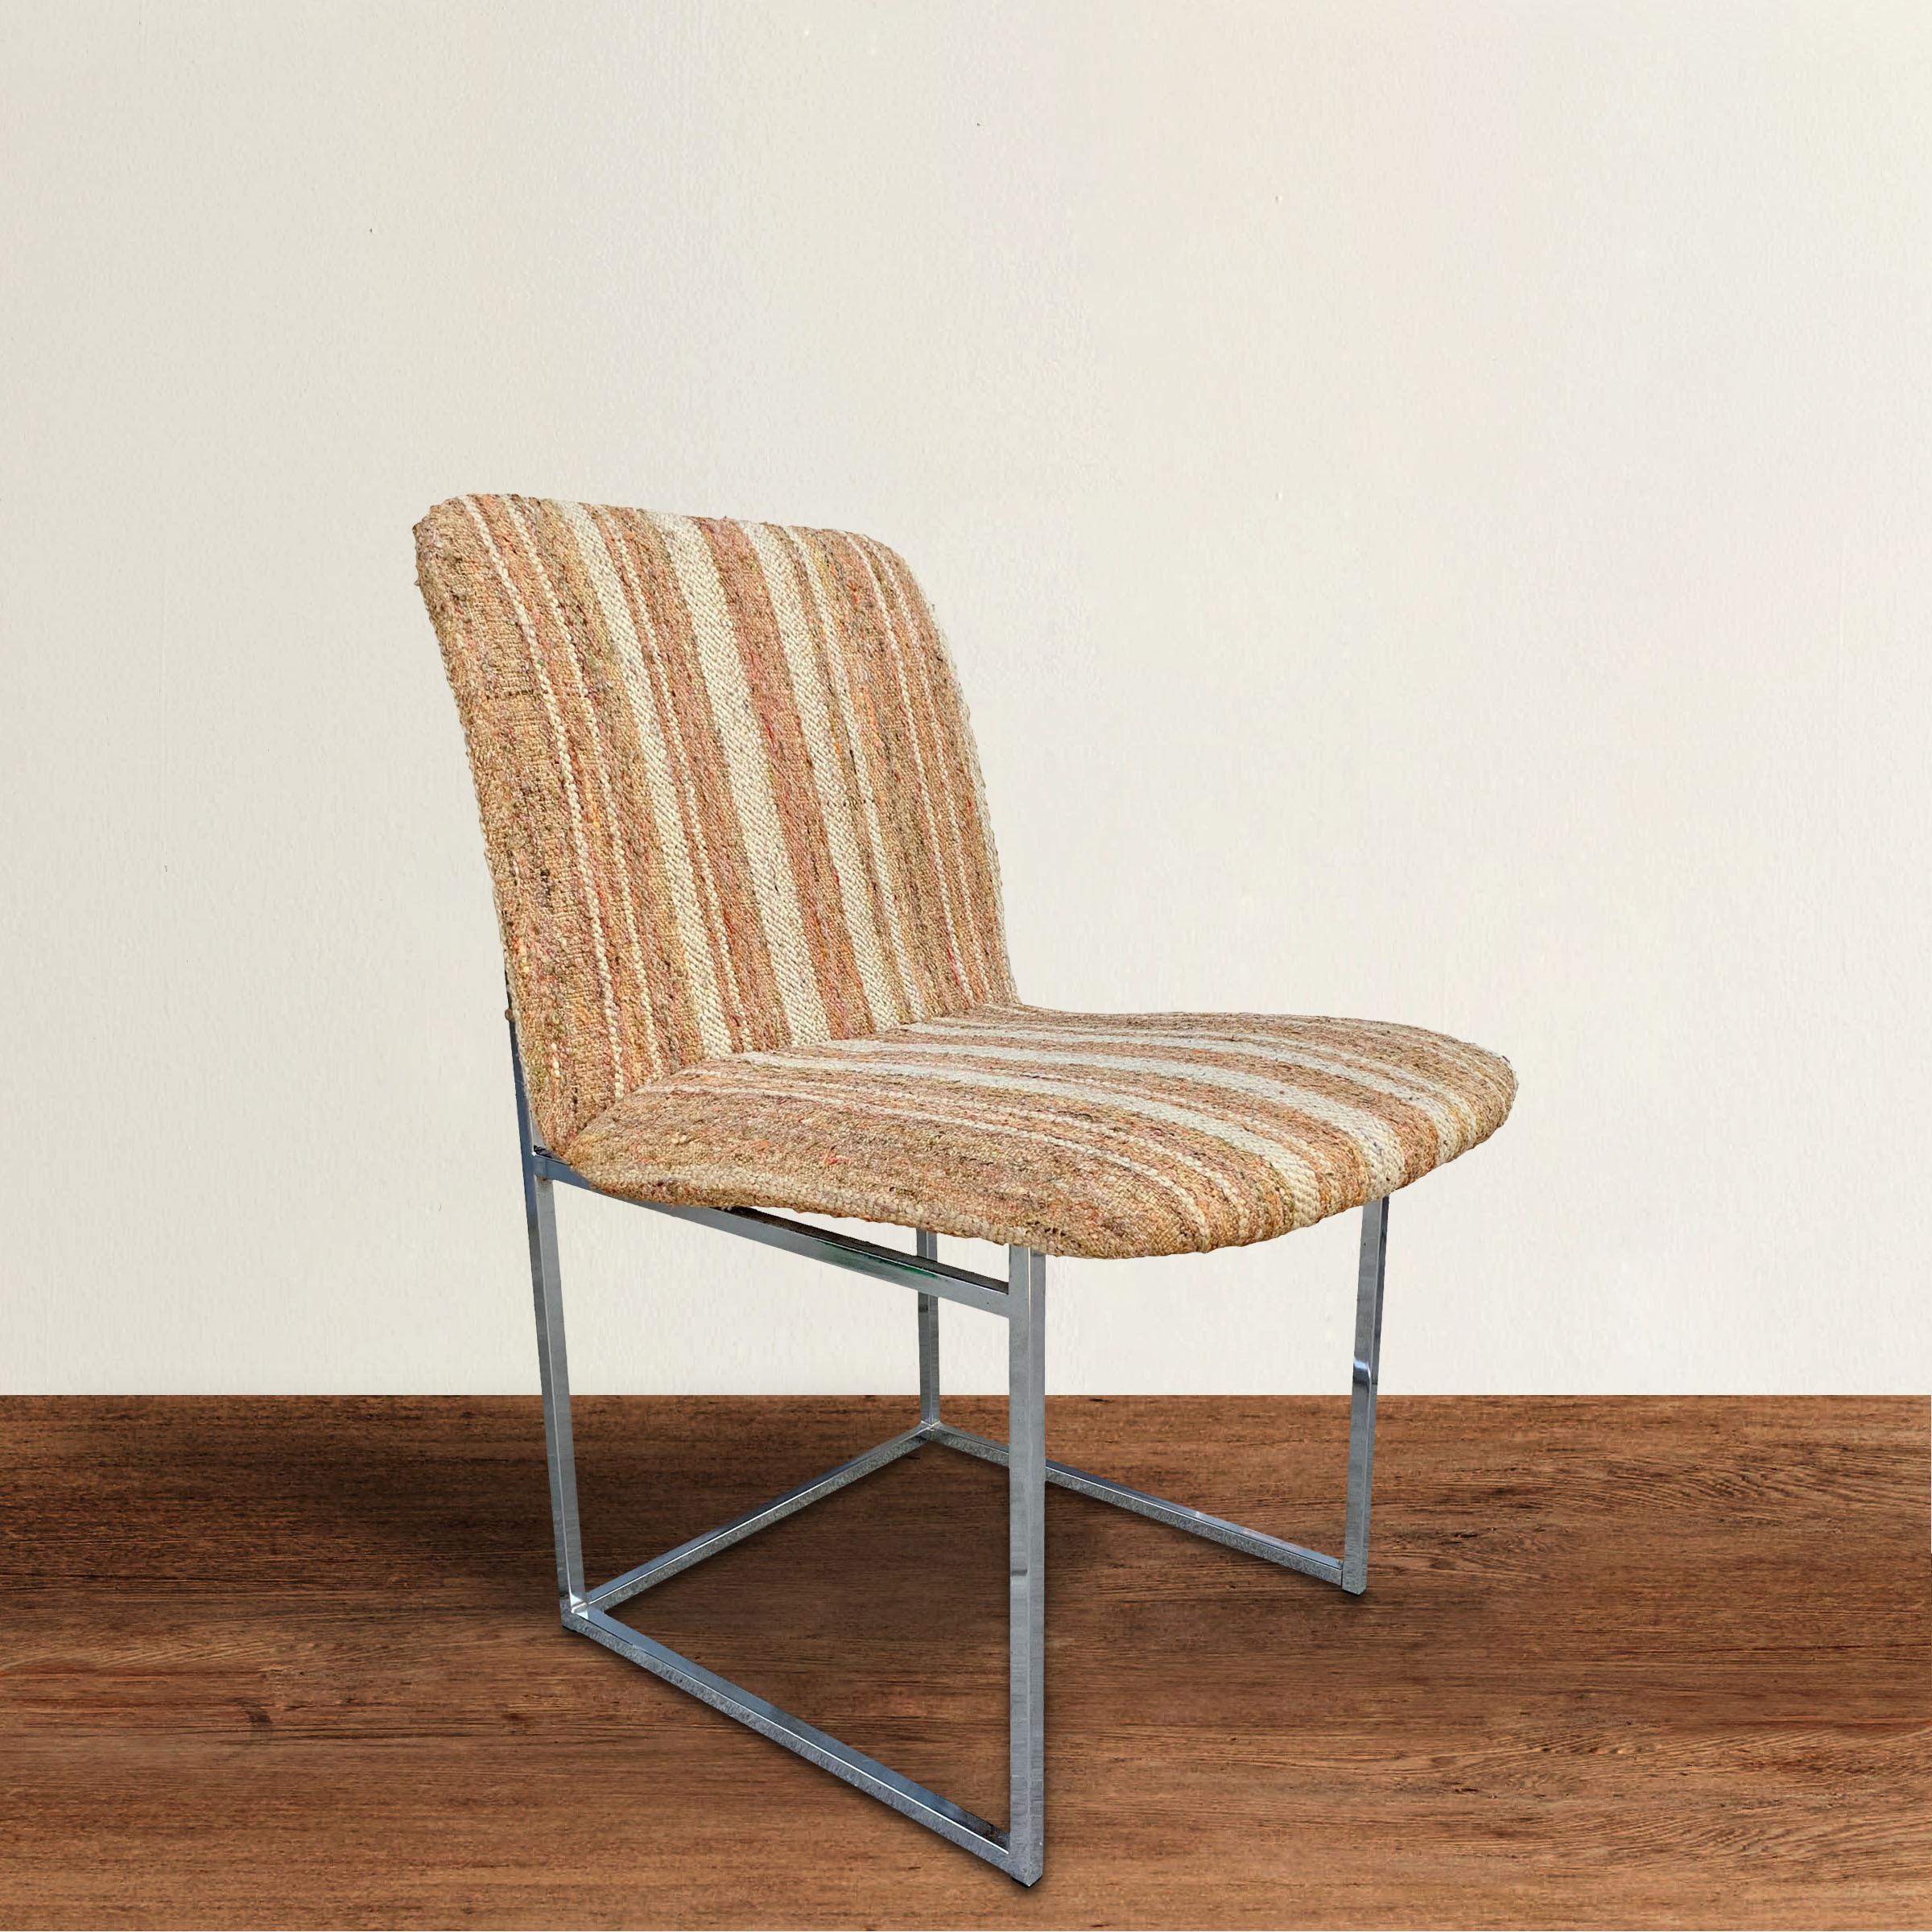 A wonderful Design Institute America chrome frame side chair with its original bouclé upholstered seat and back. Frame and upholstery are in great condition! Perfect at a desk, vanity, or as an occasional chair in your living room.